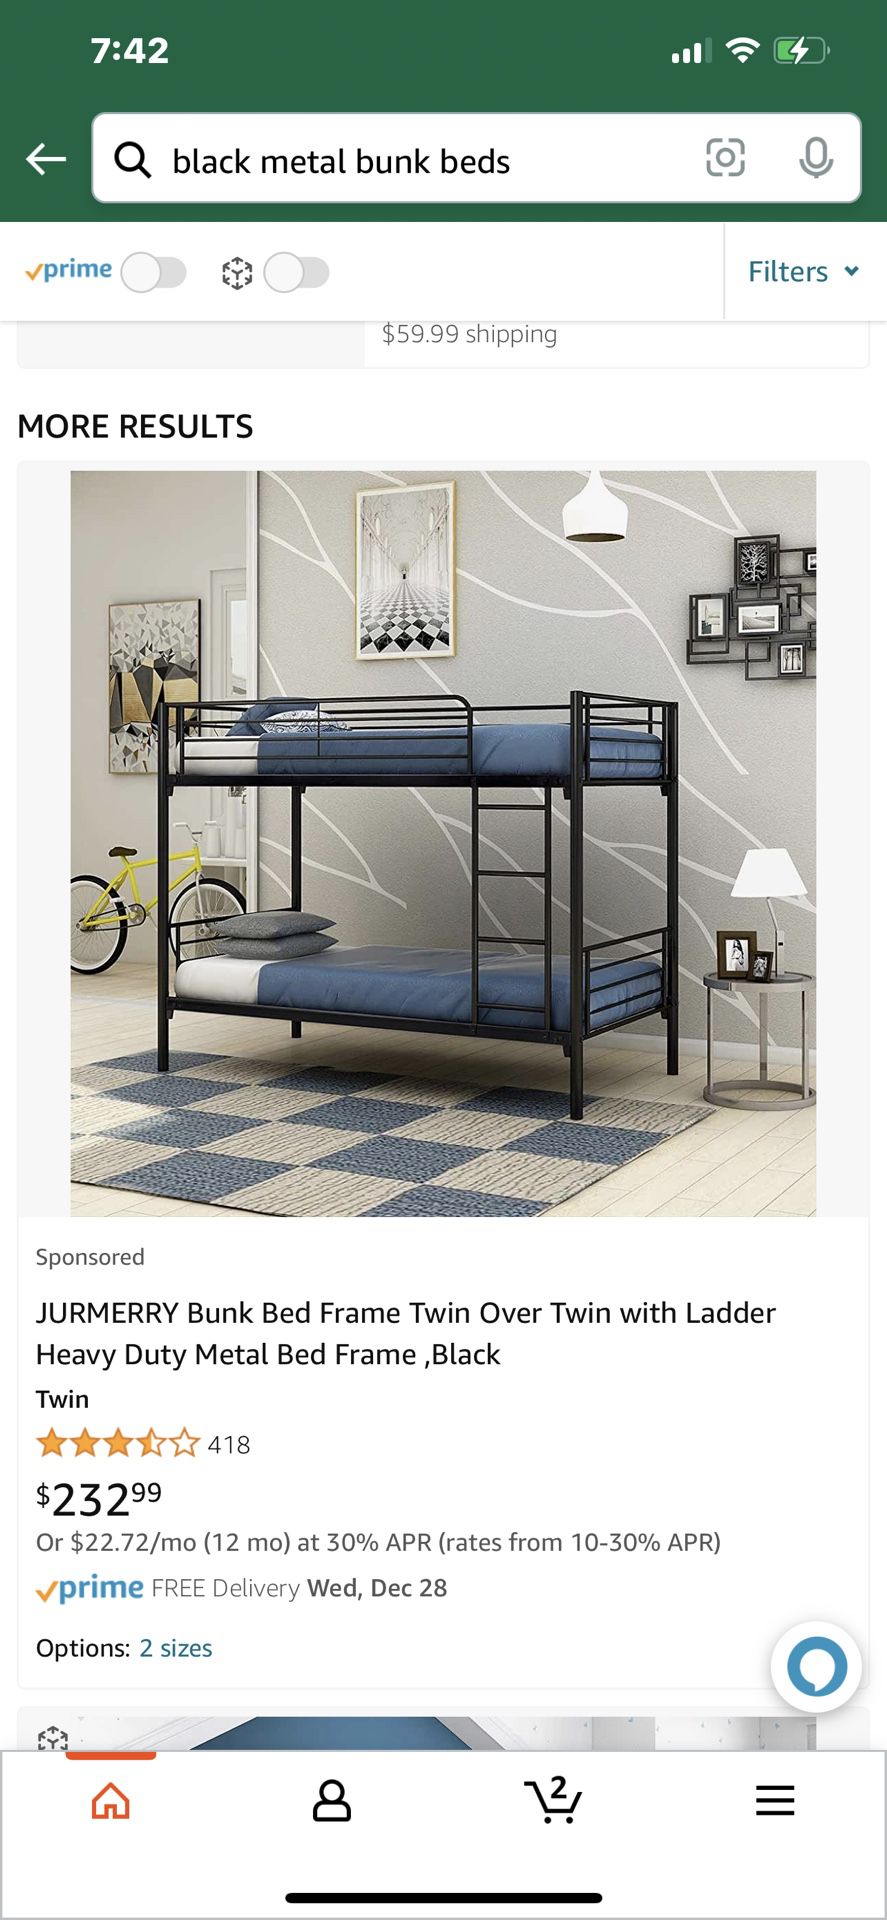 Bunkbed And Mattresses